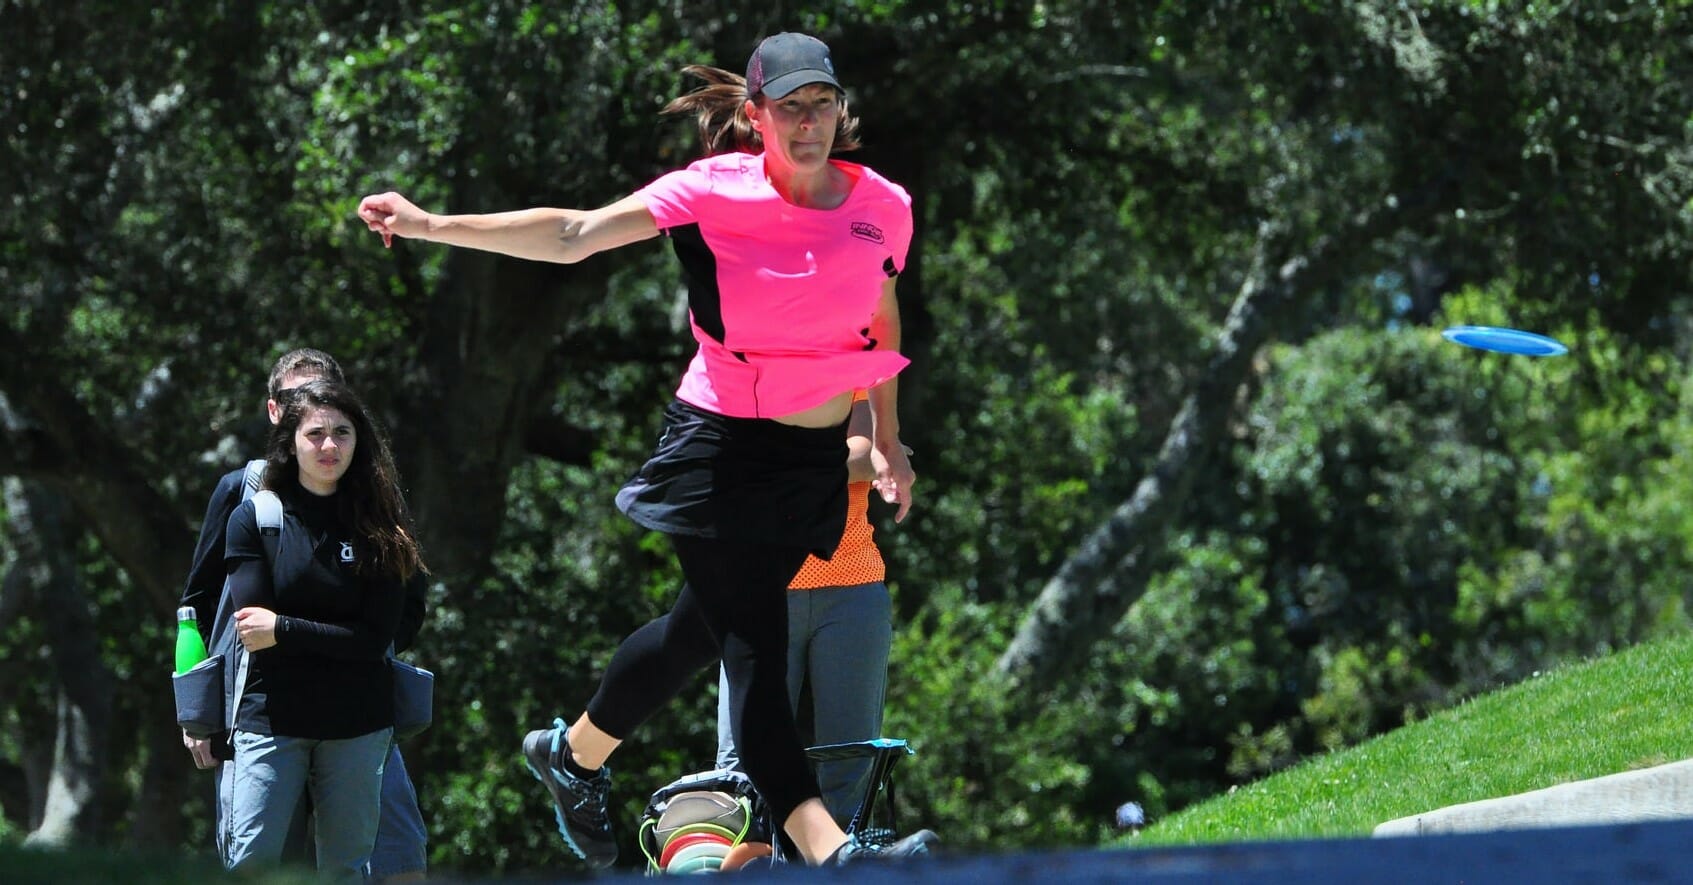 Jenkins tees off during the final round of the 2016 "Steady" Ed Masters Cup in Santa Cruz, California. Photo: PDGA